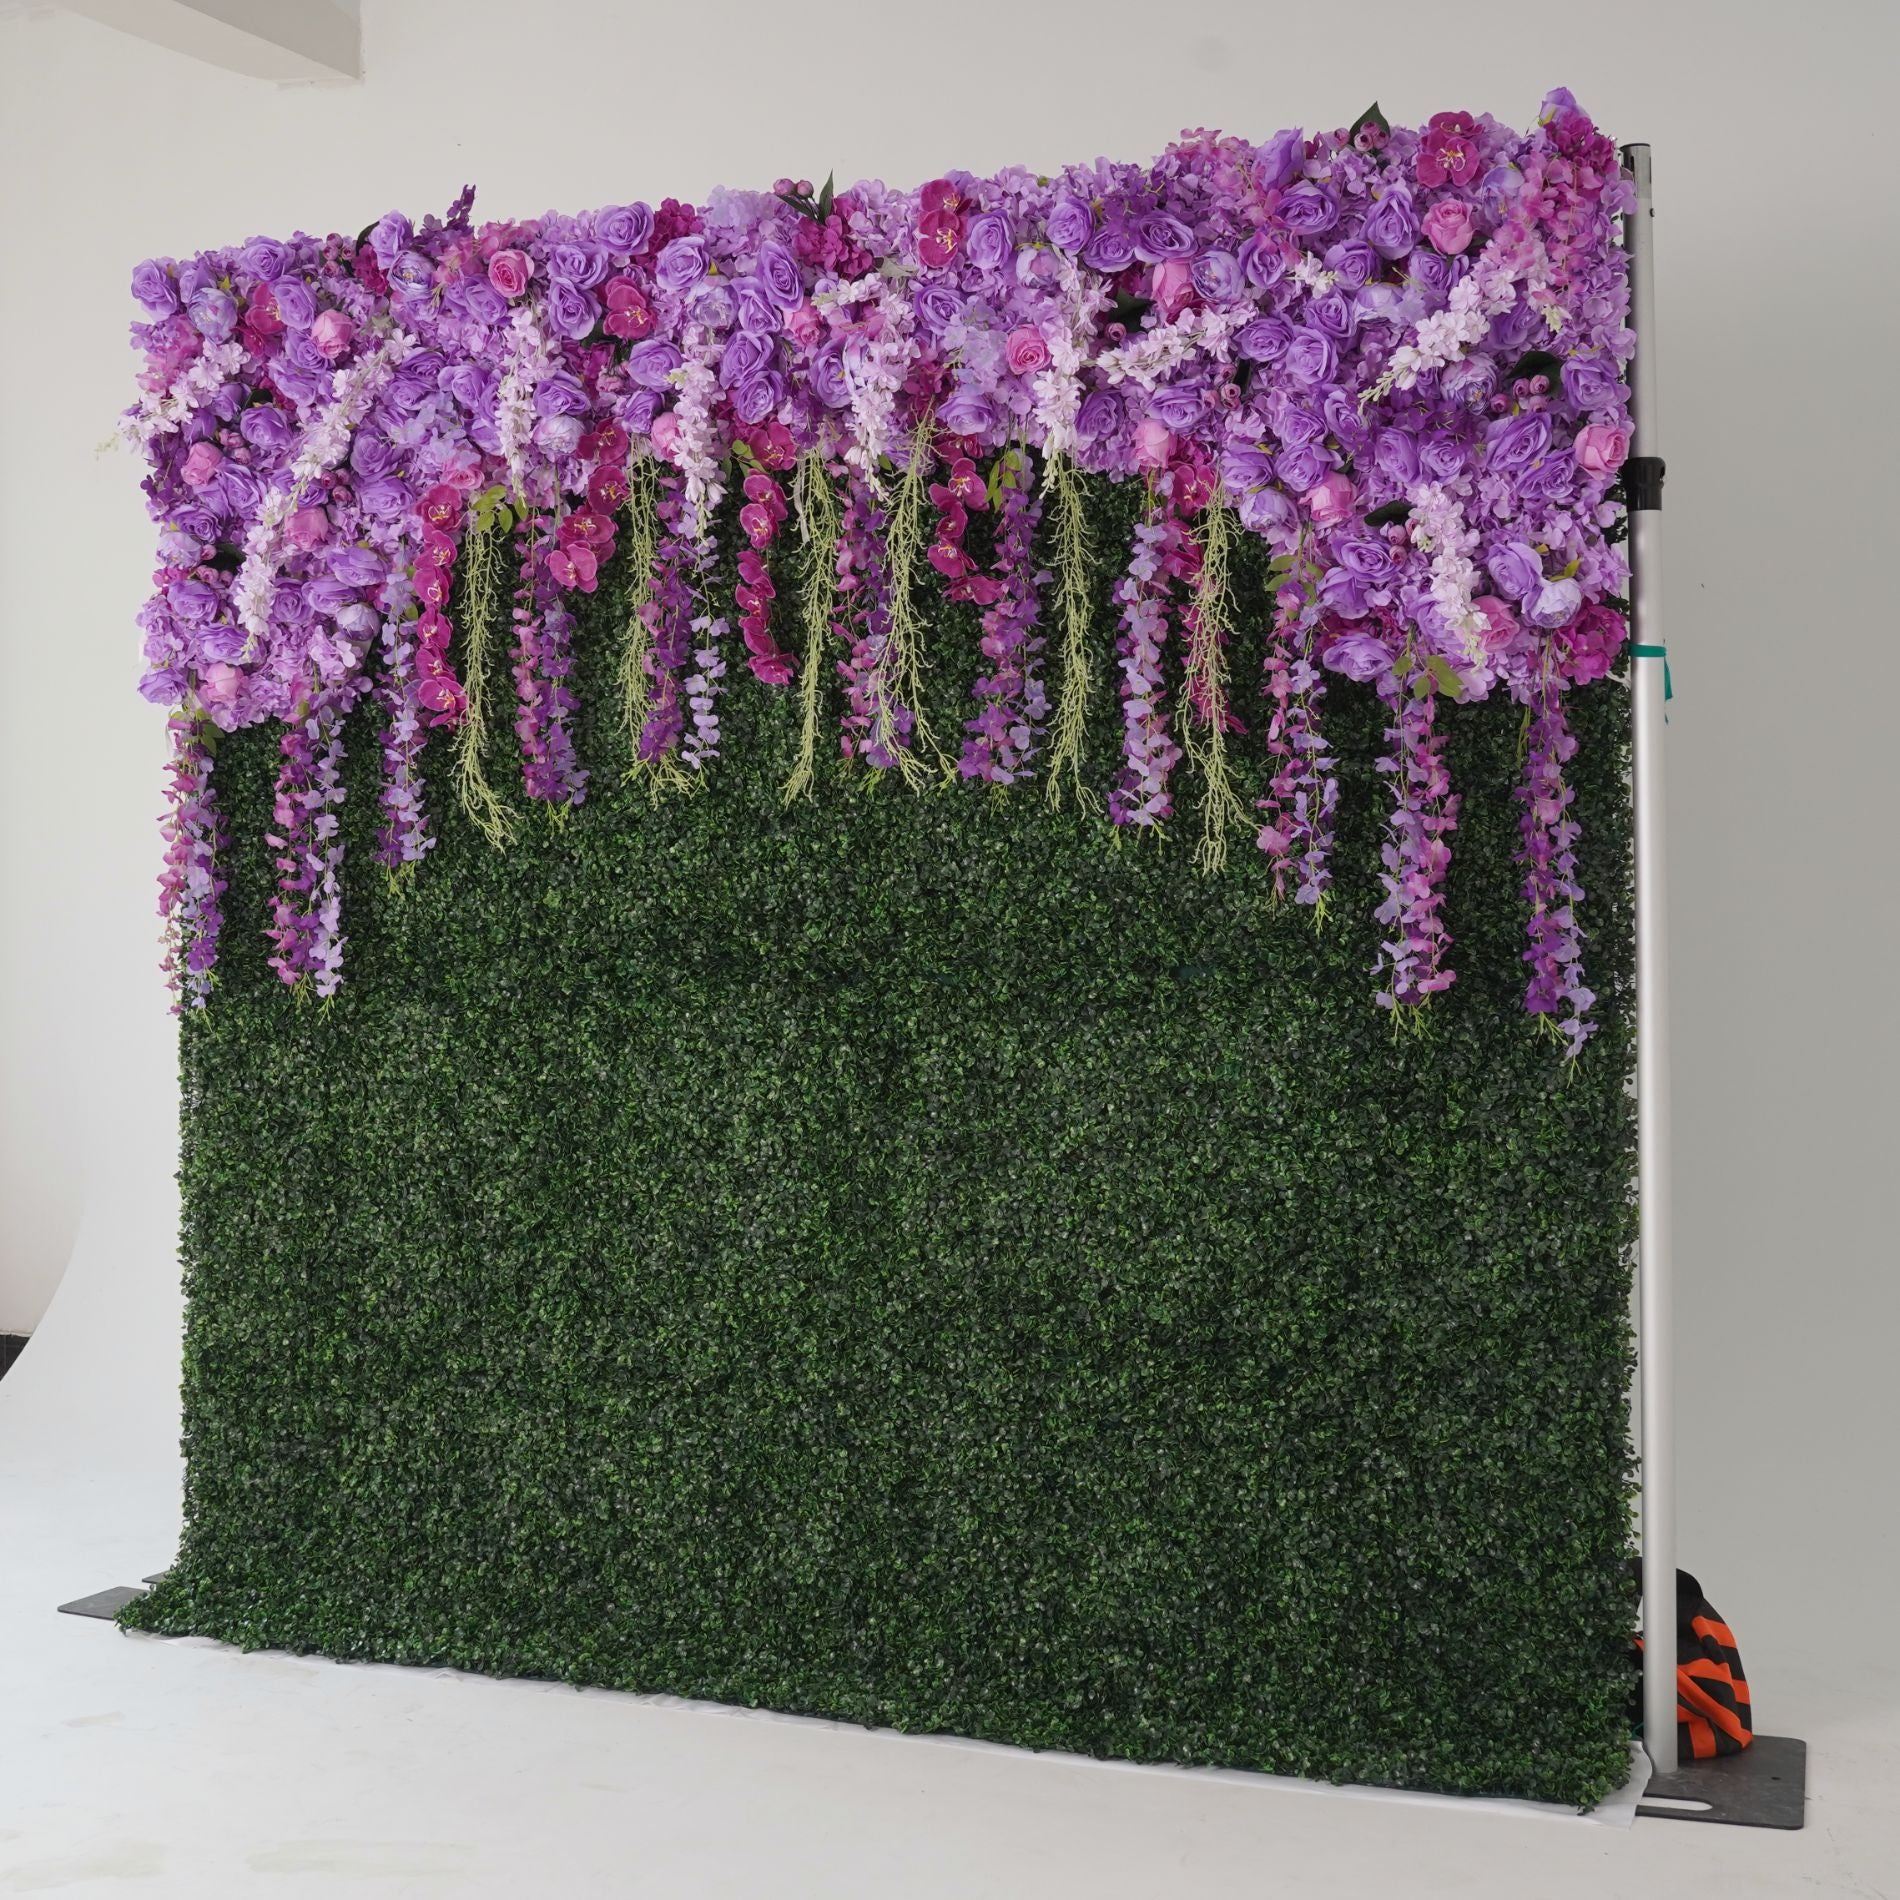 Flower Wall Purple Florals Cover Wedding Party Proposal Decor